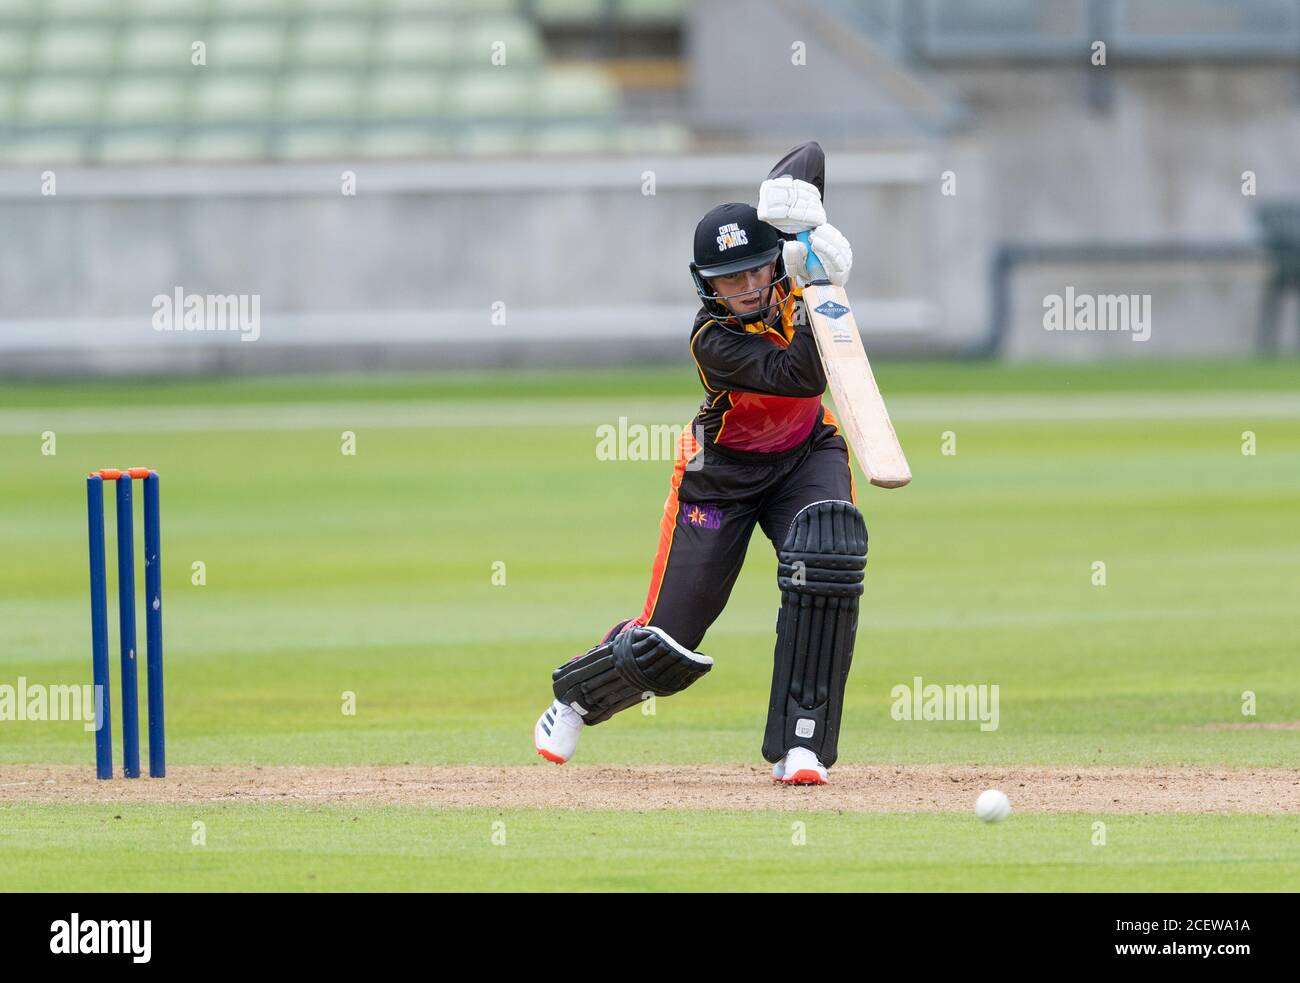 Milly Home batting for Central Sparks in a Rachael Heyhoe Flint Trophy match against Thunder played at Edgbaston Cricket Ground Stock Photo